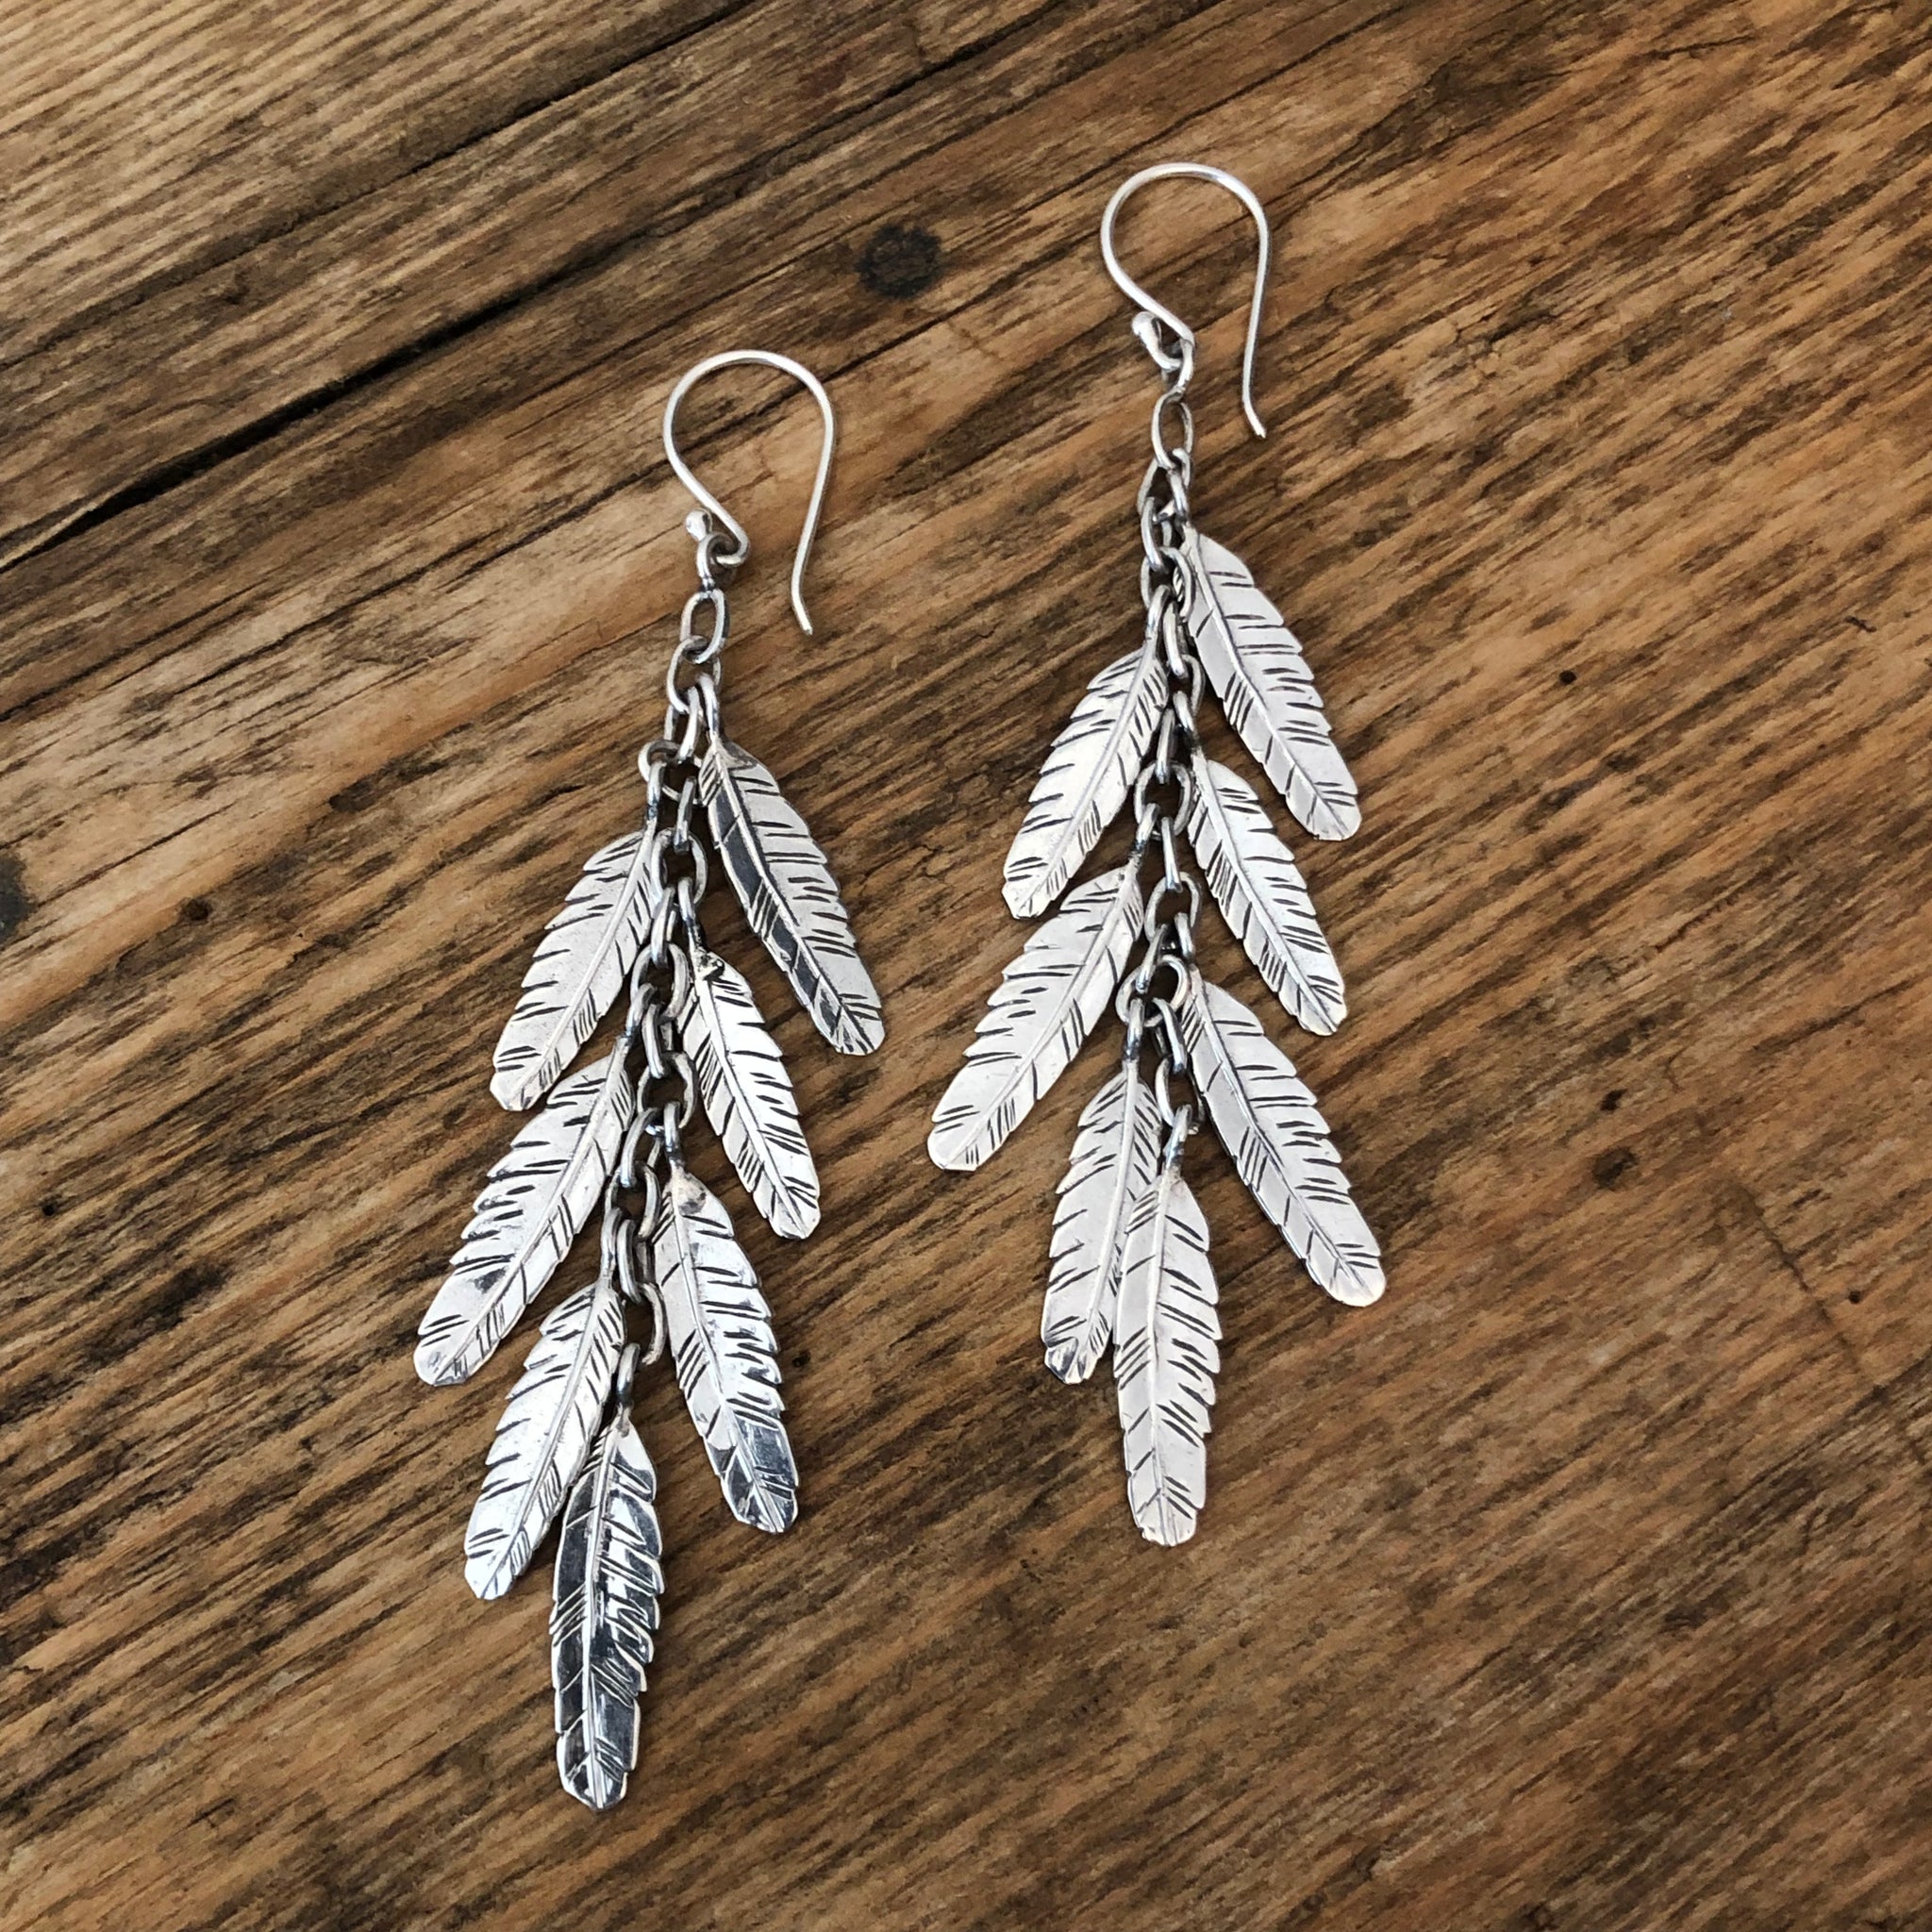 'Seven Feathers for Seven Days' Earrings